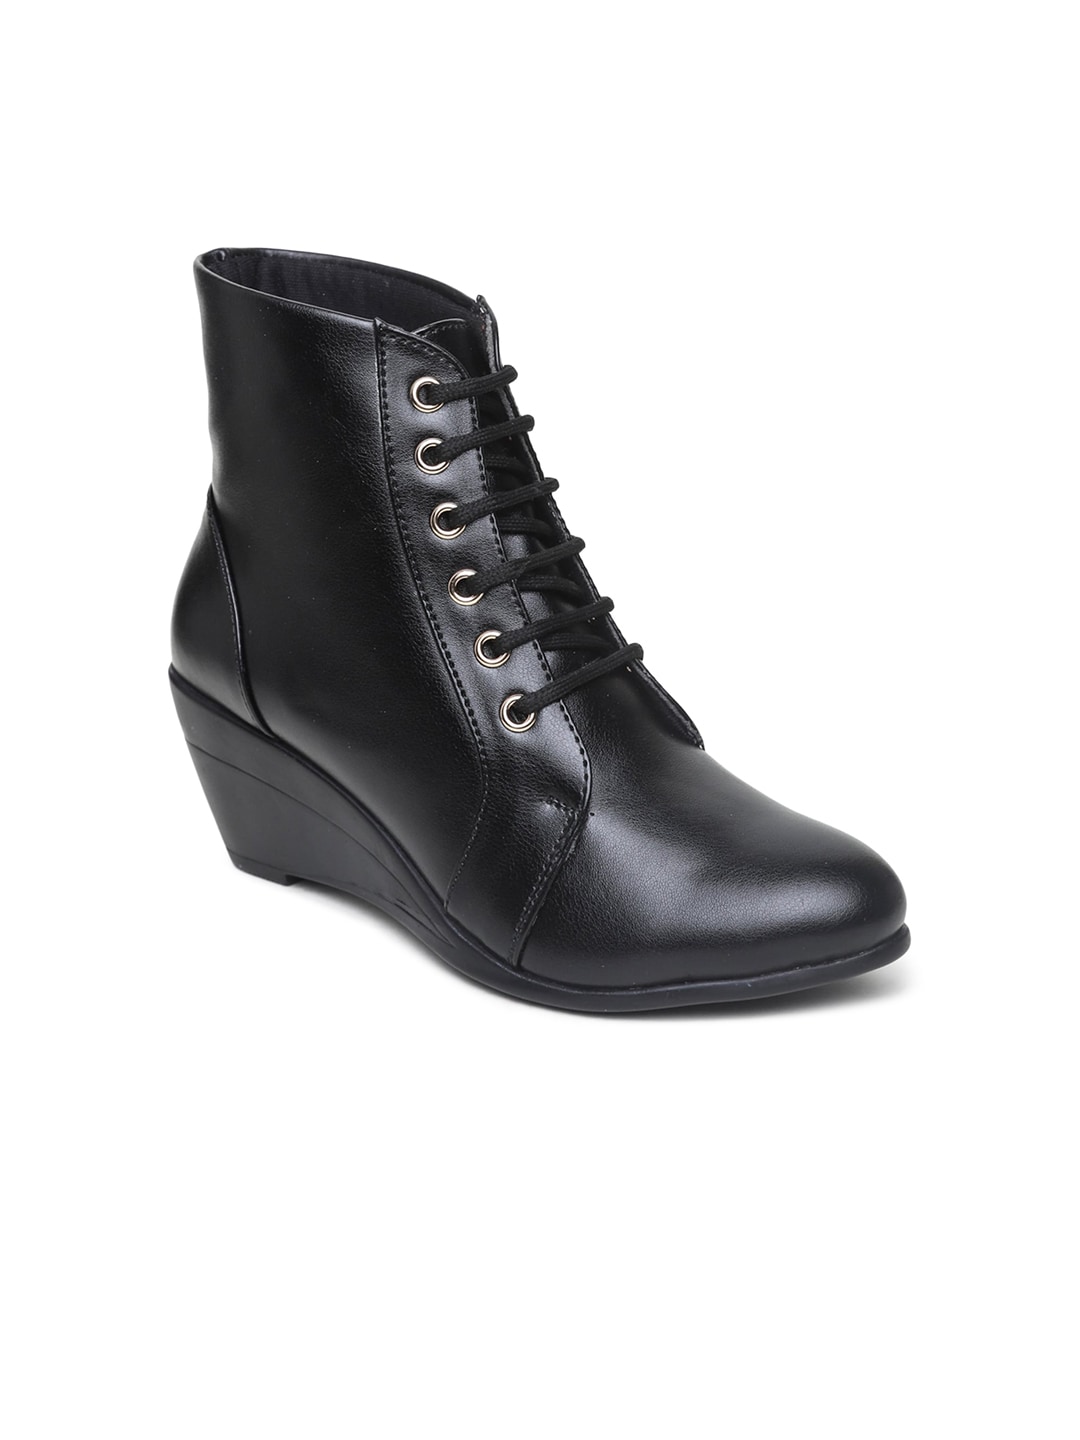 VALIOSAA Woman Black High-Top Wedge Heeled Boots Price in India